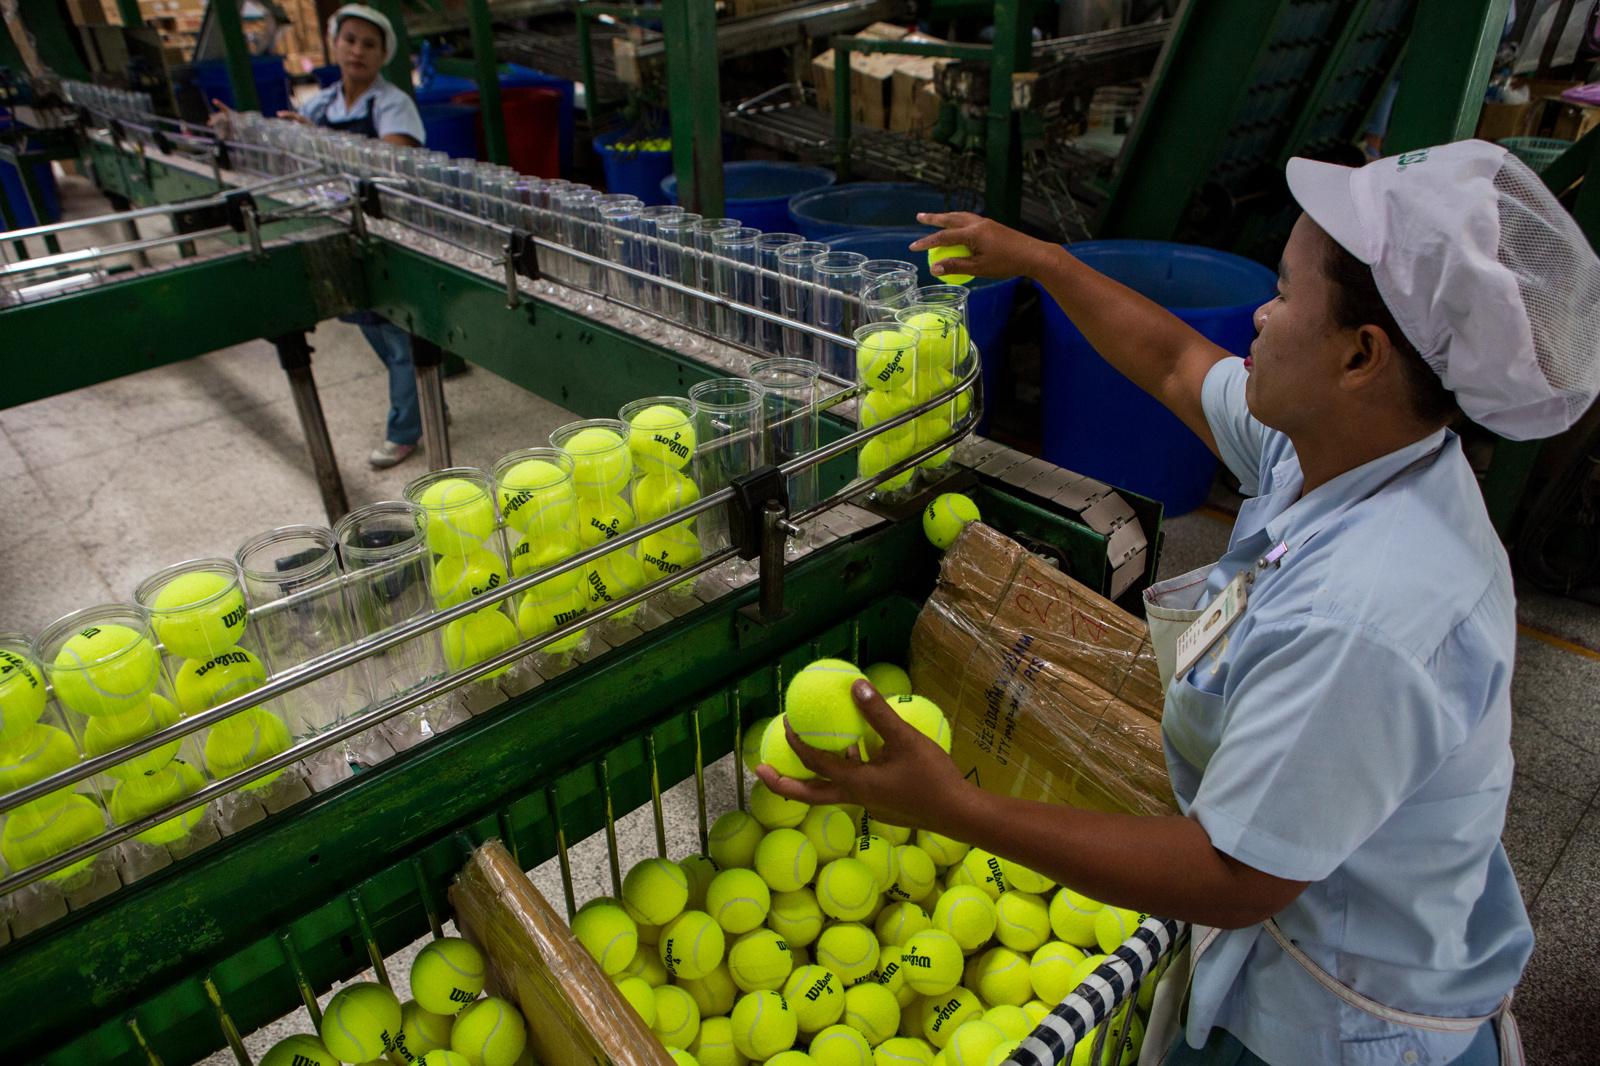 Wilson Tennis Ball Factory - For The New York Times - Nakhon Pathom, Thailand Ð August 18, 2016 : Balls are...